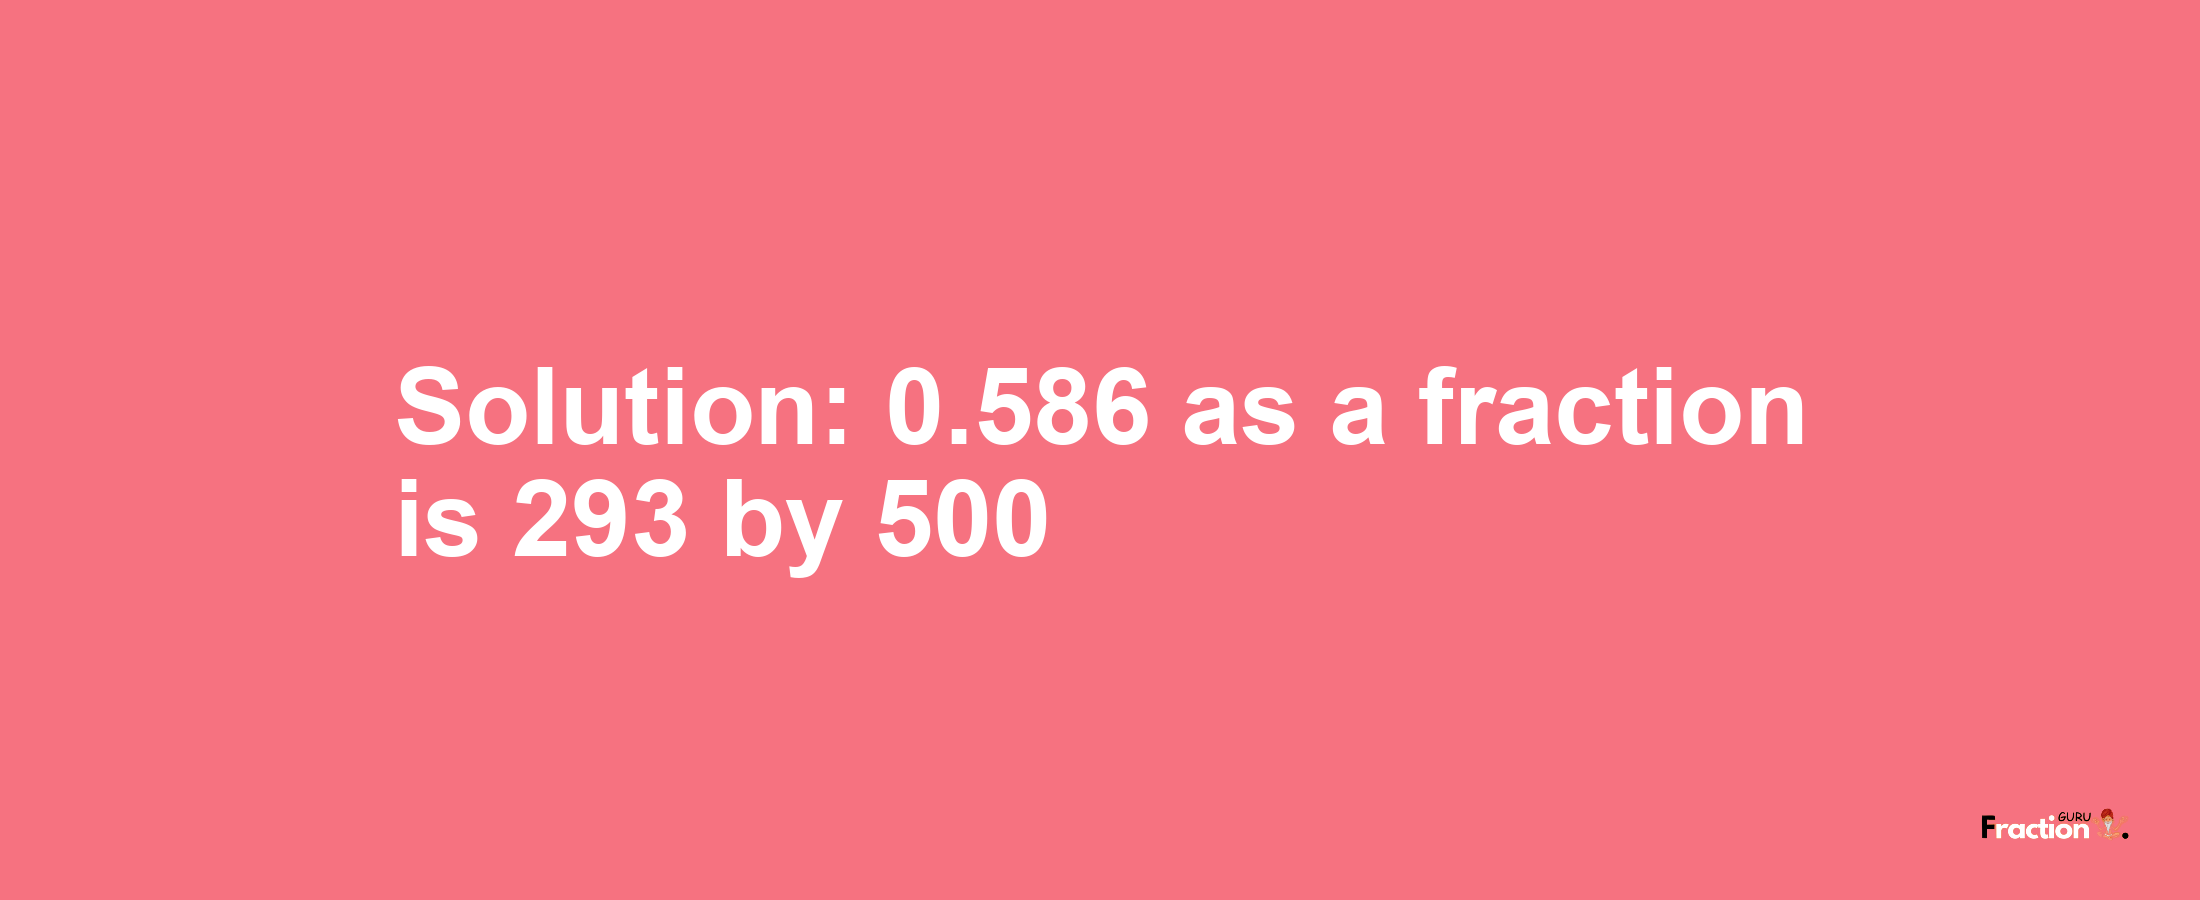 Solution:0.586 as a fraction is 293/500